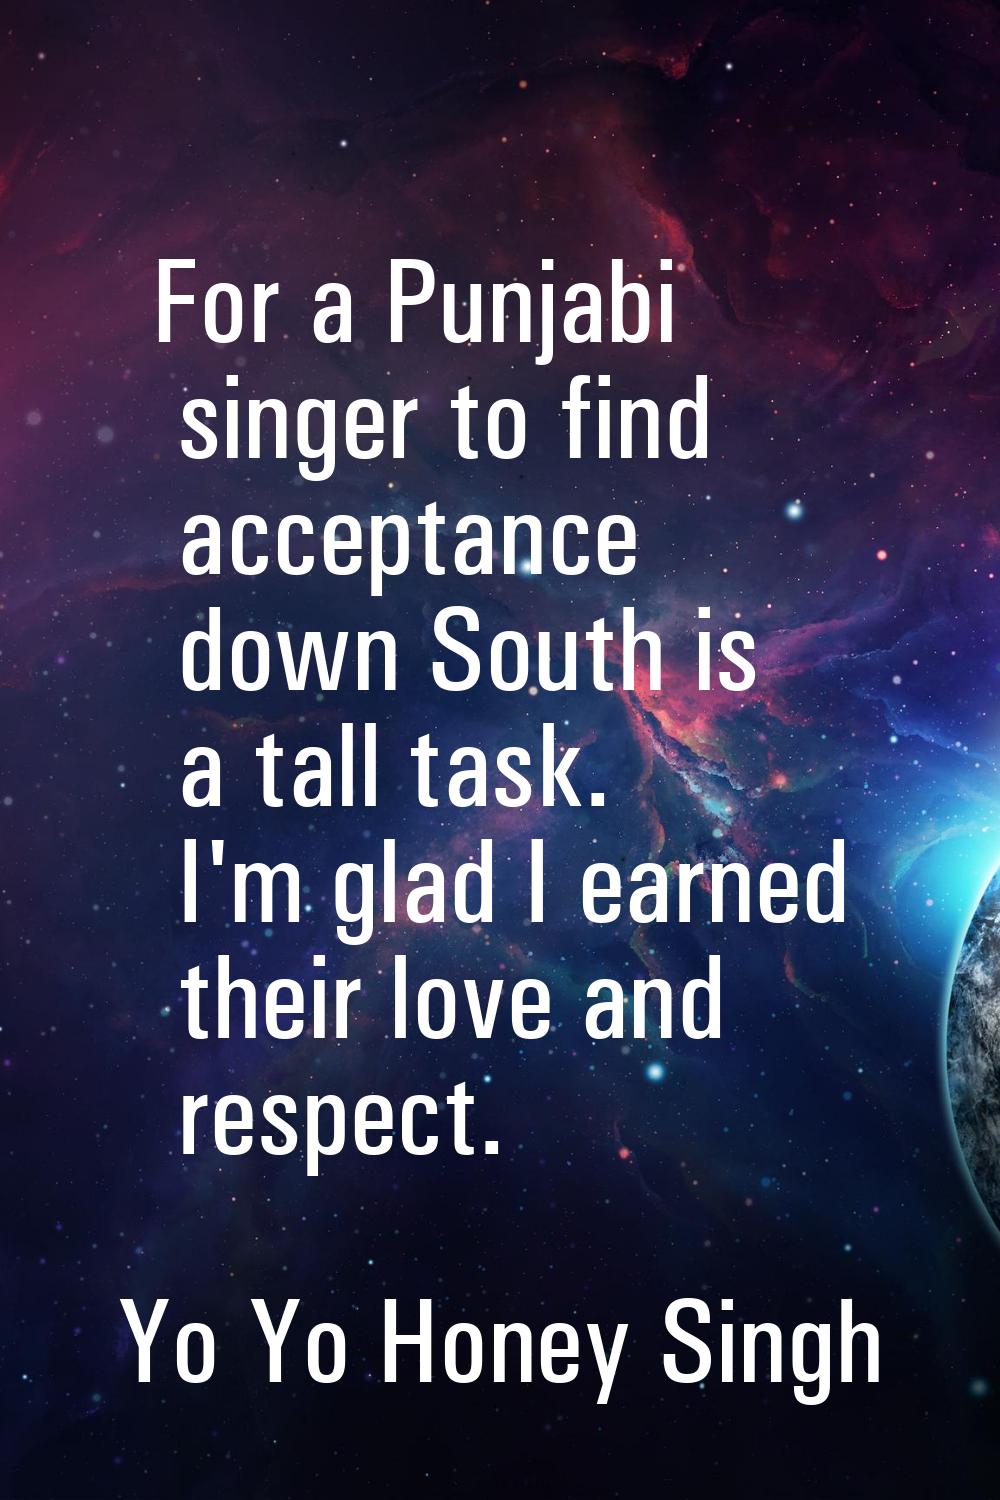 For a Punjabi singer to find acceptance down South is a tall task. I'm glad I earned their love and